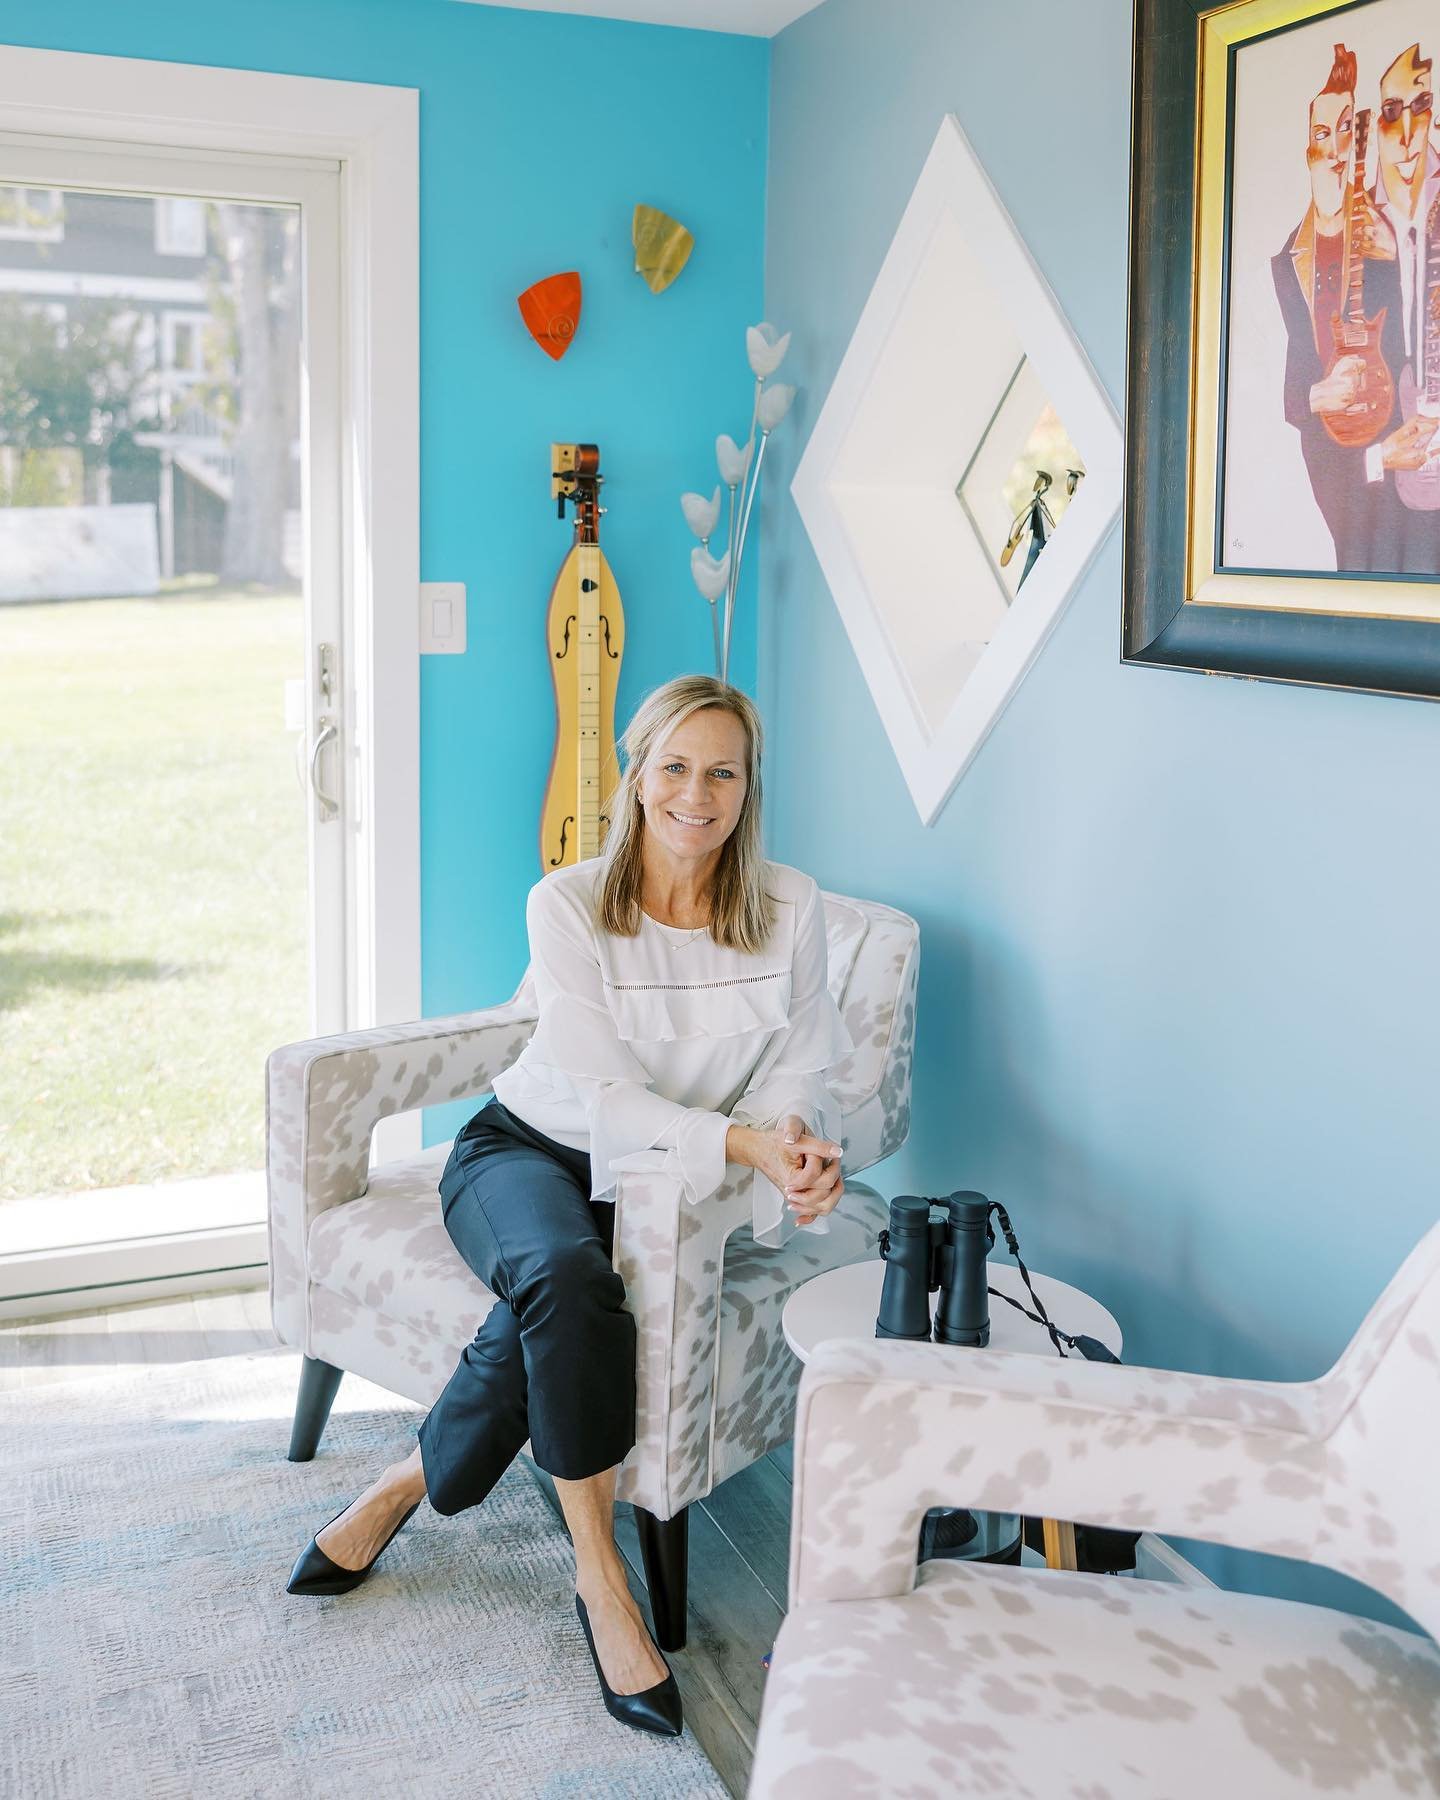 Among empty nesters, Baby Boomers still hold onto 28% of spacious homes, while Millennials with children only possess 14%. If you're contemplating downsizing, this revelation could be a game-changer for you. The truth is, there's a substantial demand